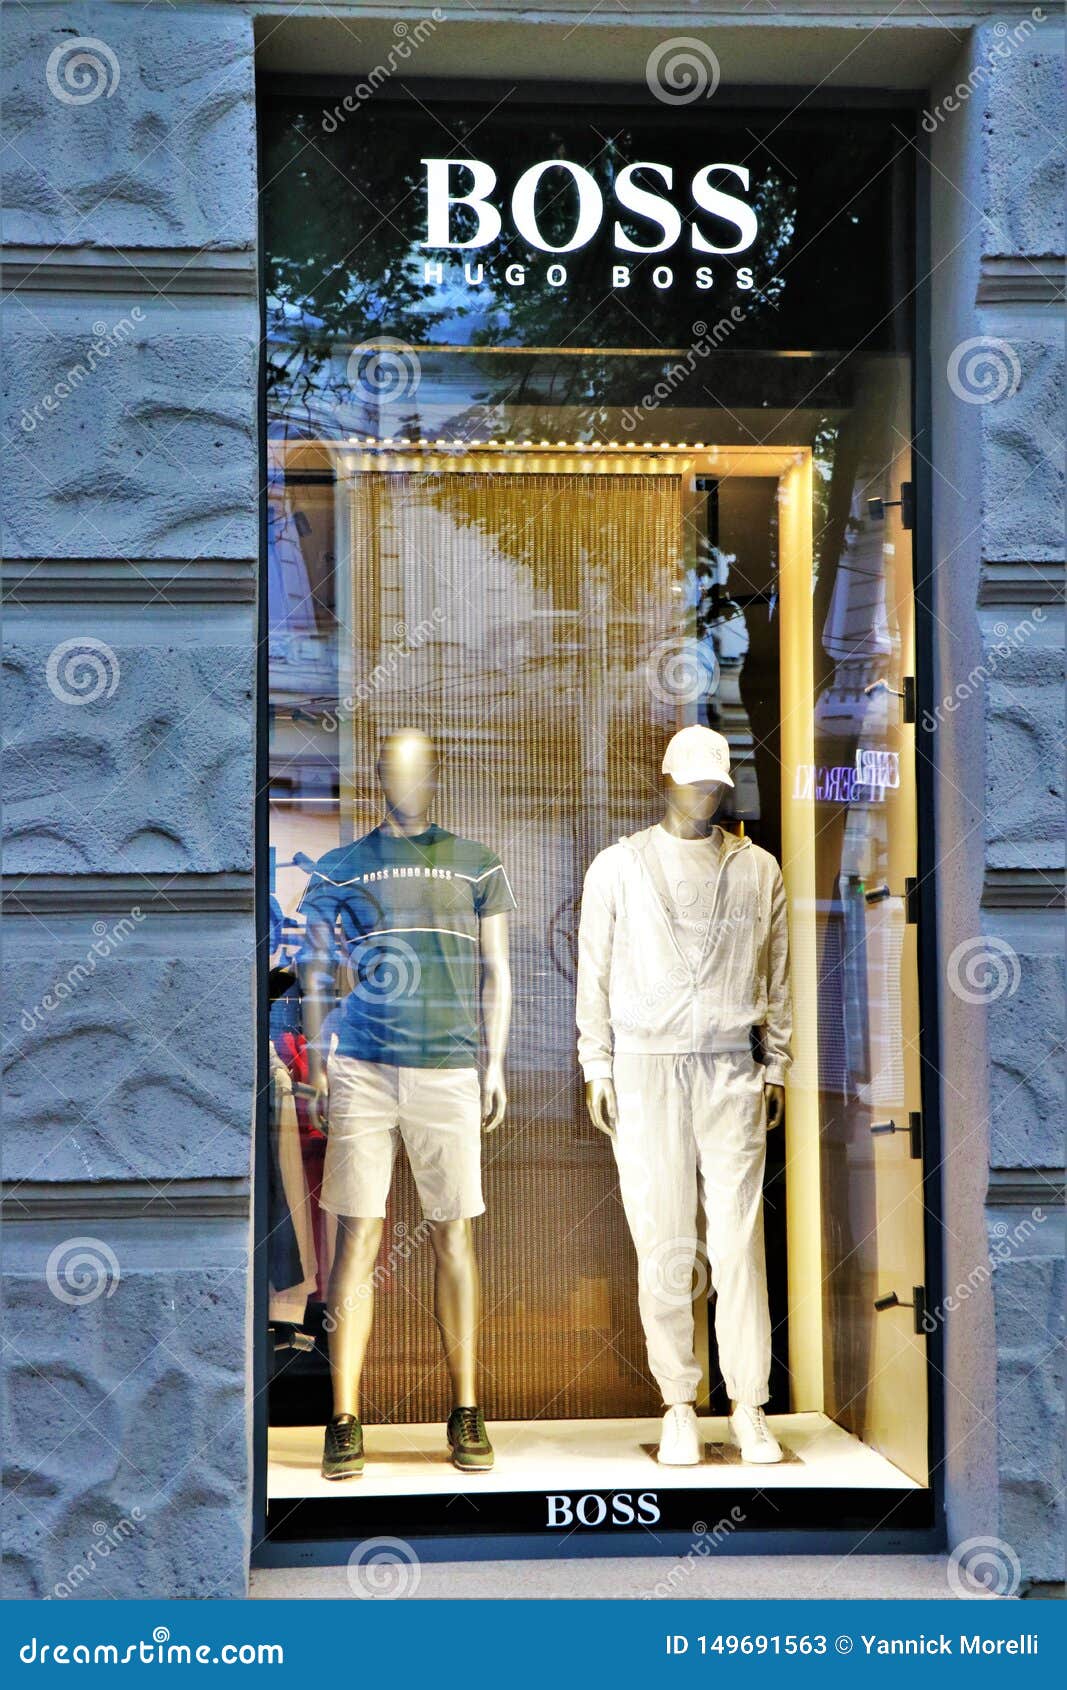 Window Display of a Boss Brand Clothing Editorial Stock Photo - Image of editorial, 149691563